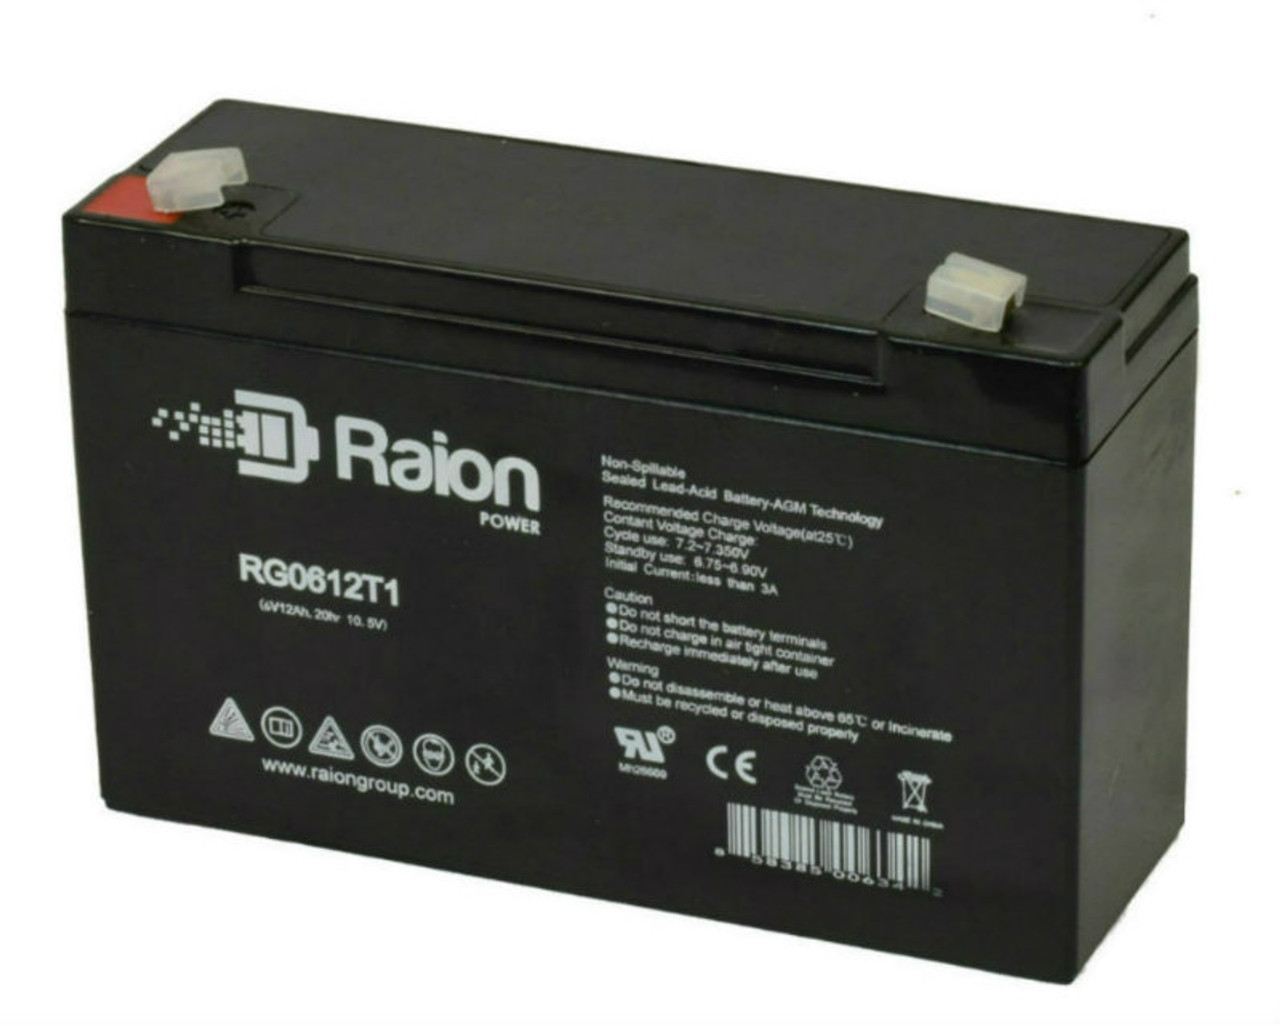 Raion Power RG06120T1 Replacement Battery for Kontron 7 Balloon Pump Medical Equipment